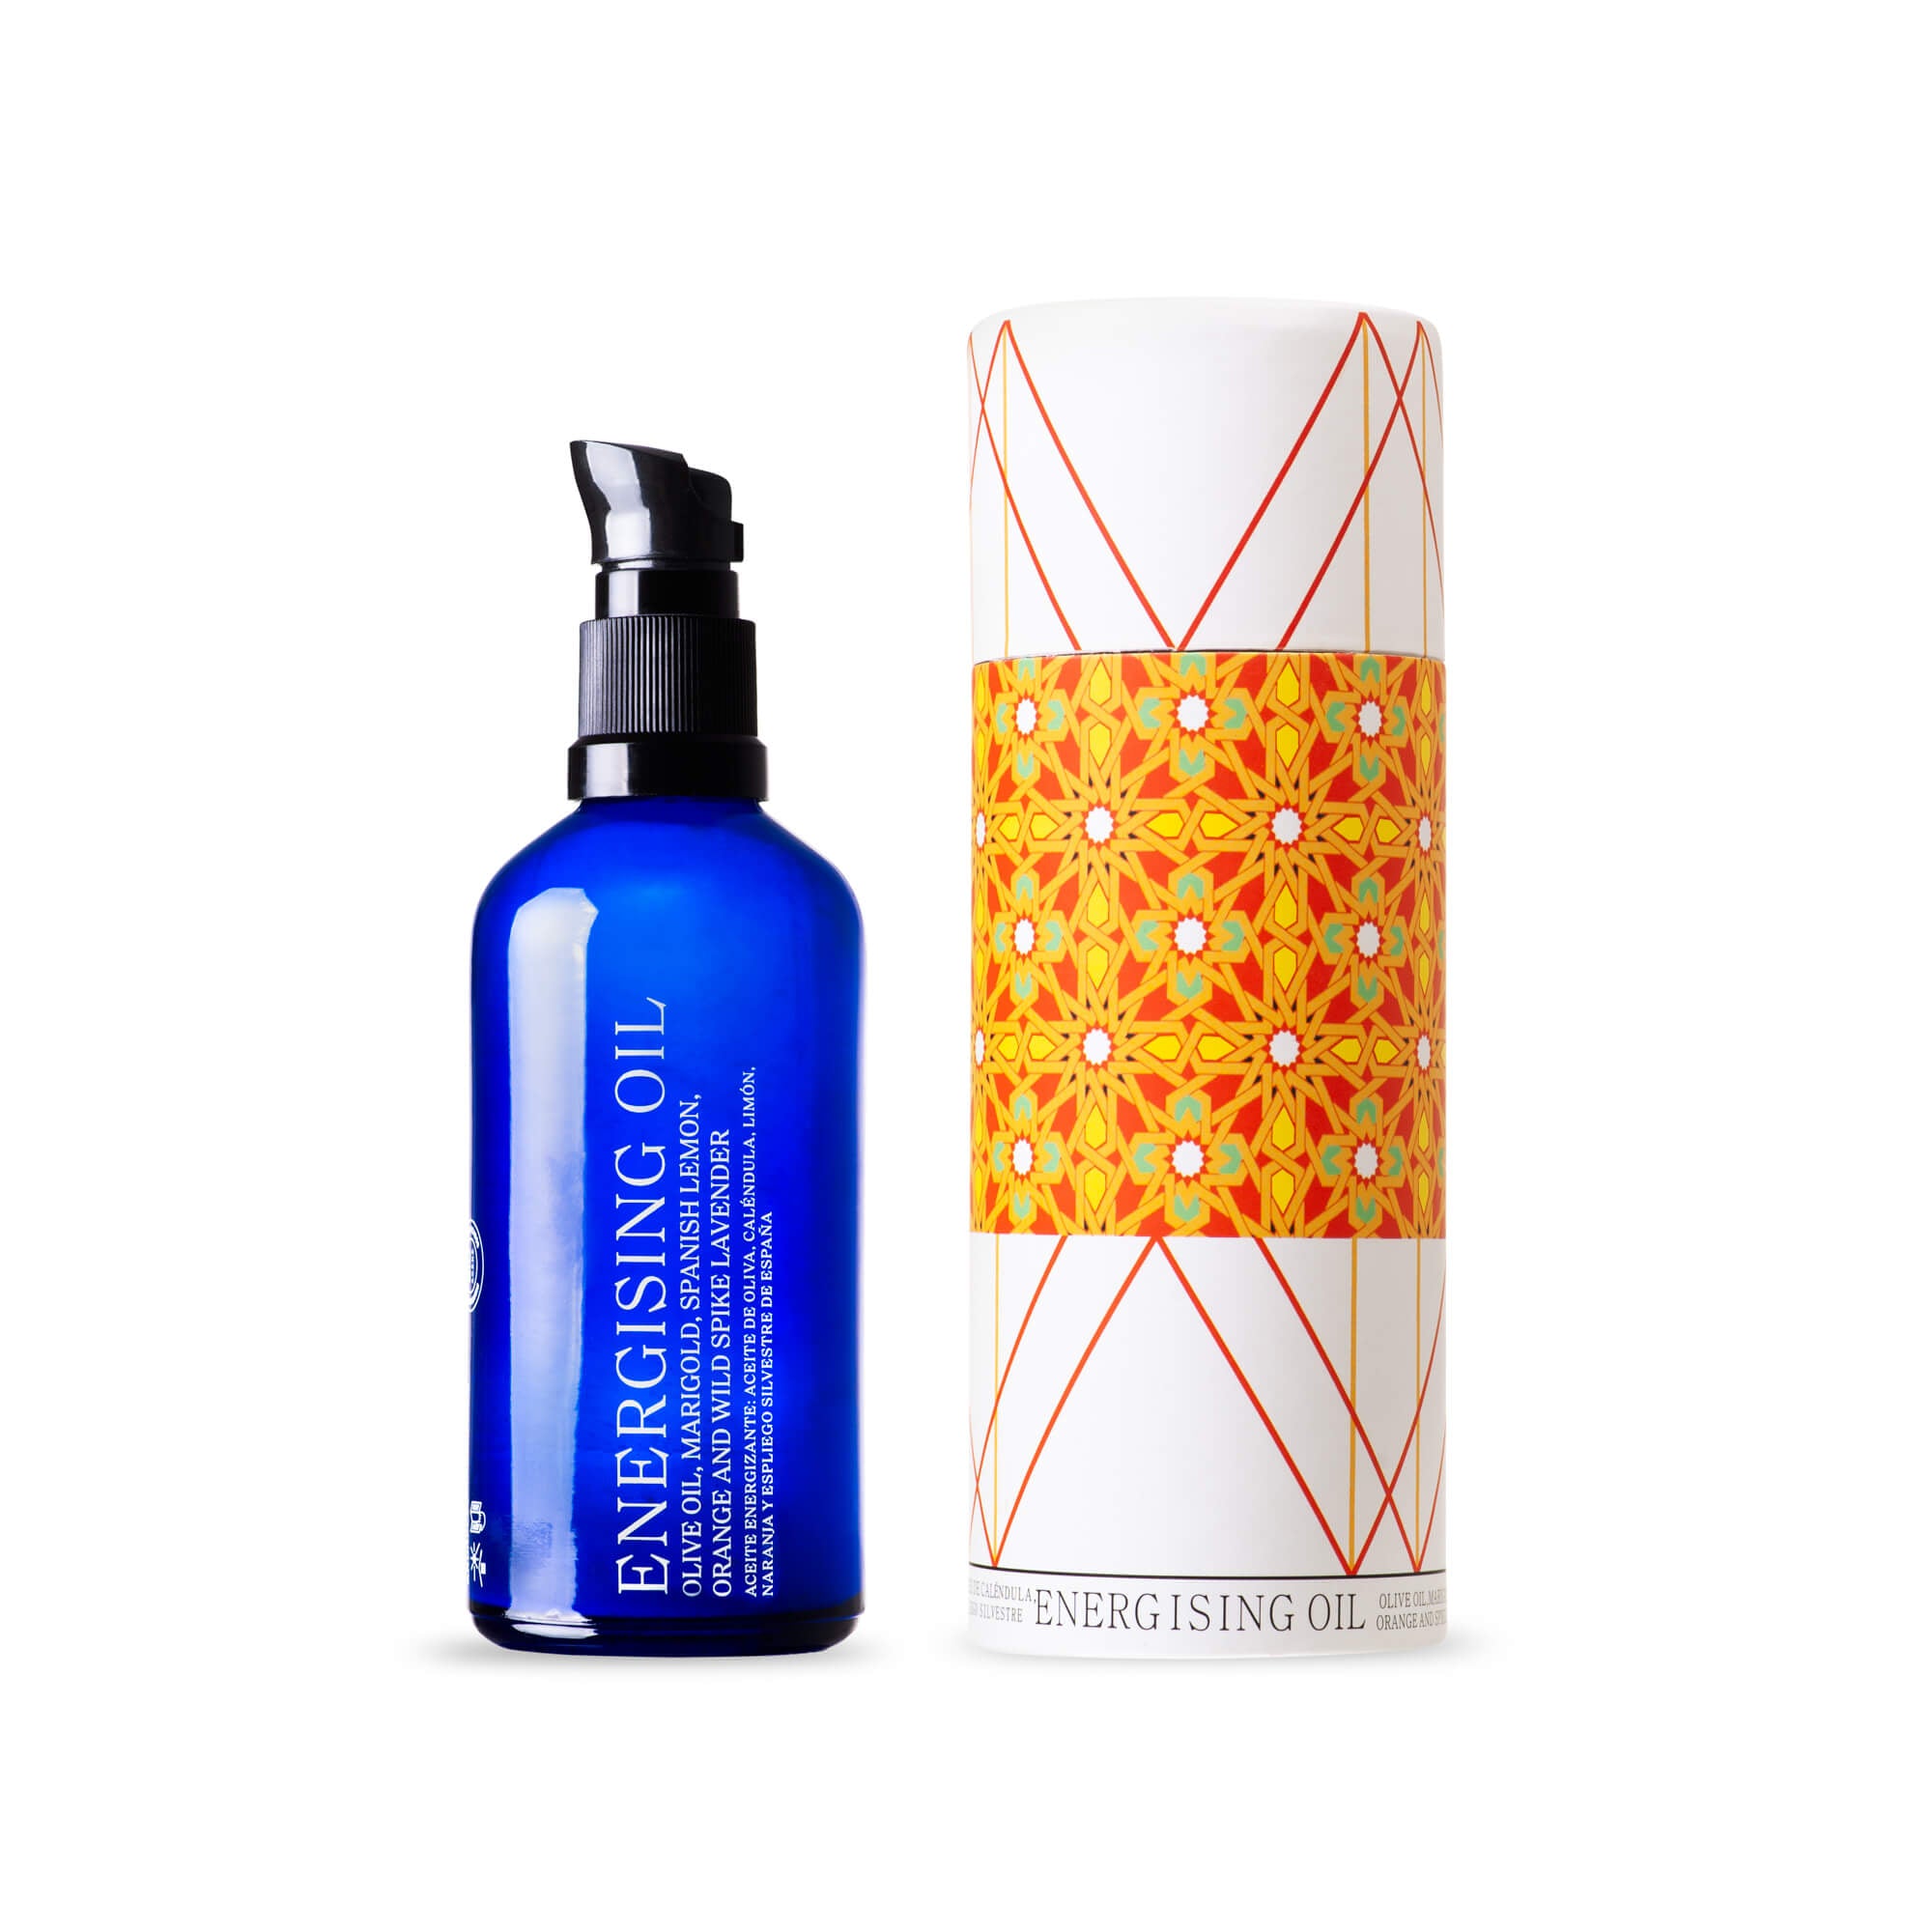 andaluz skincare energising oil in a bright blue glass bottle with a black cap and a white round box with yellow flowers.  the box design is inspired from the tiles of the Alhambra Palace in Granada, Spain.